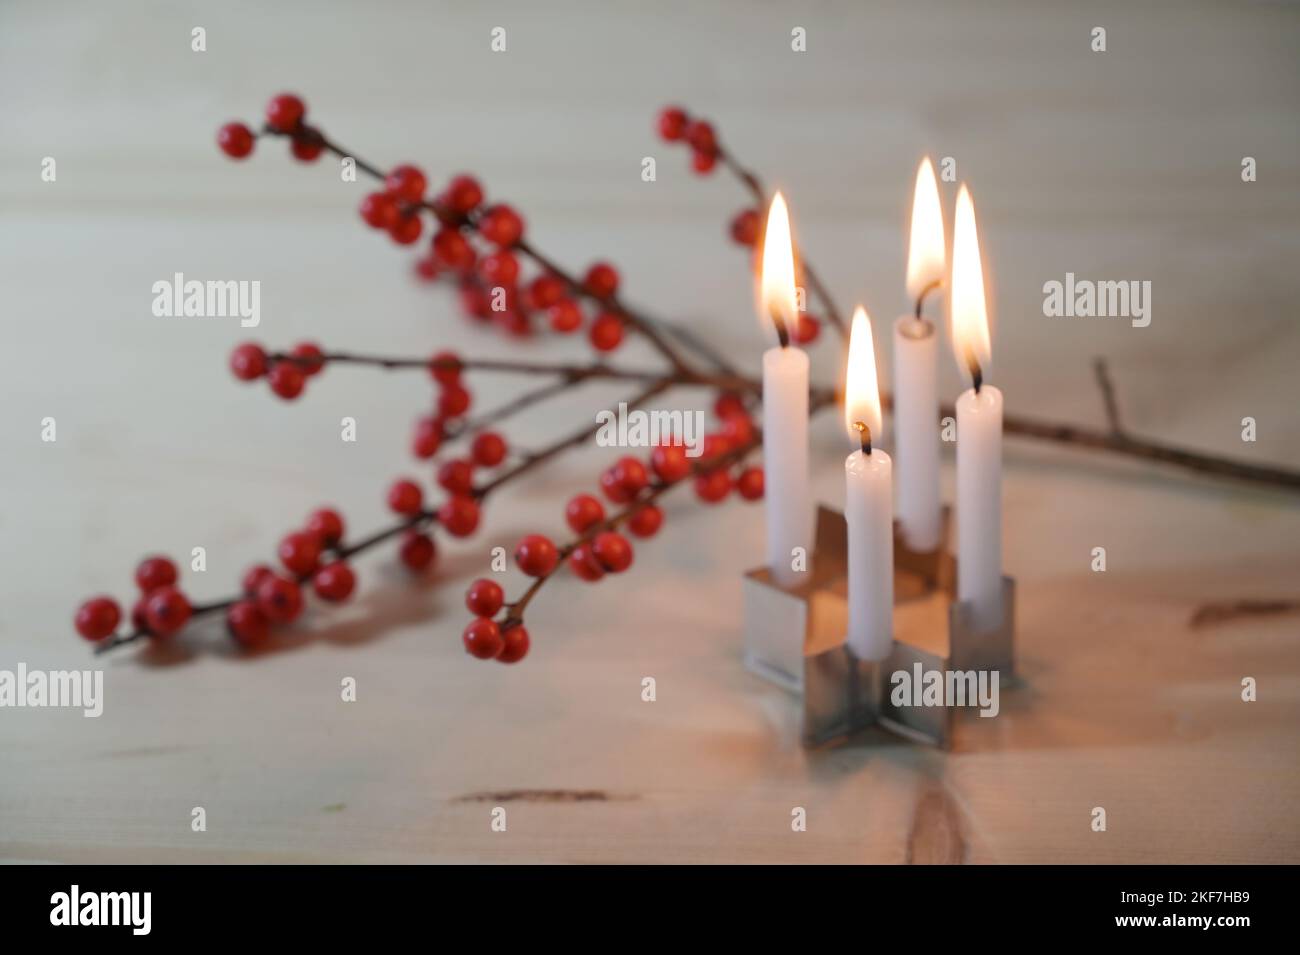 Mini advent wreath, four small candles on a cookie cutter in star shape in front of a holly branch with red berries on a wooden table, selected focus, Stock Photo